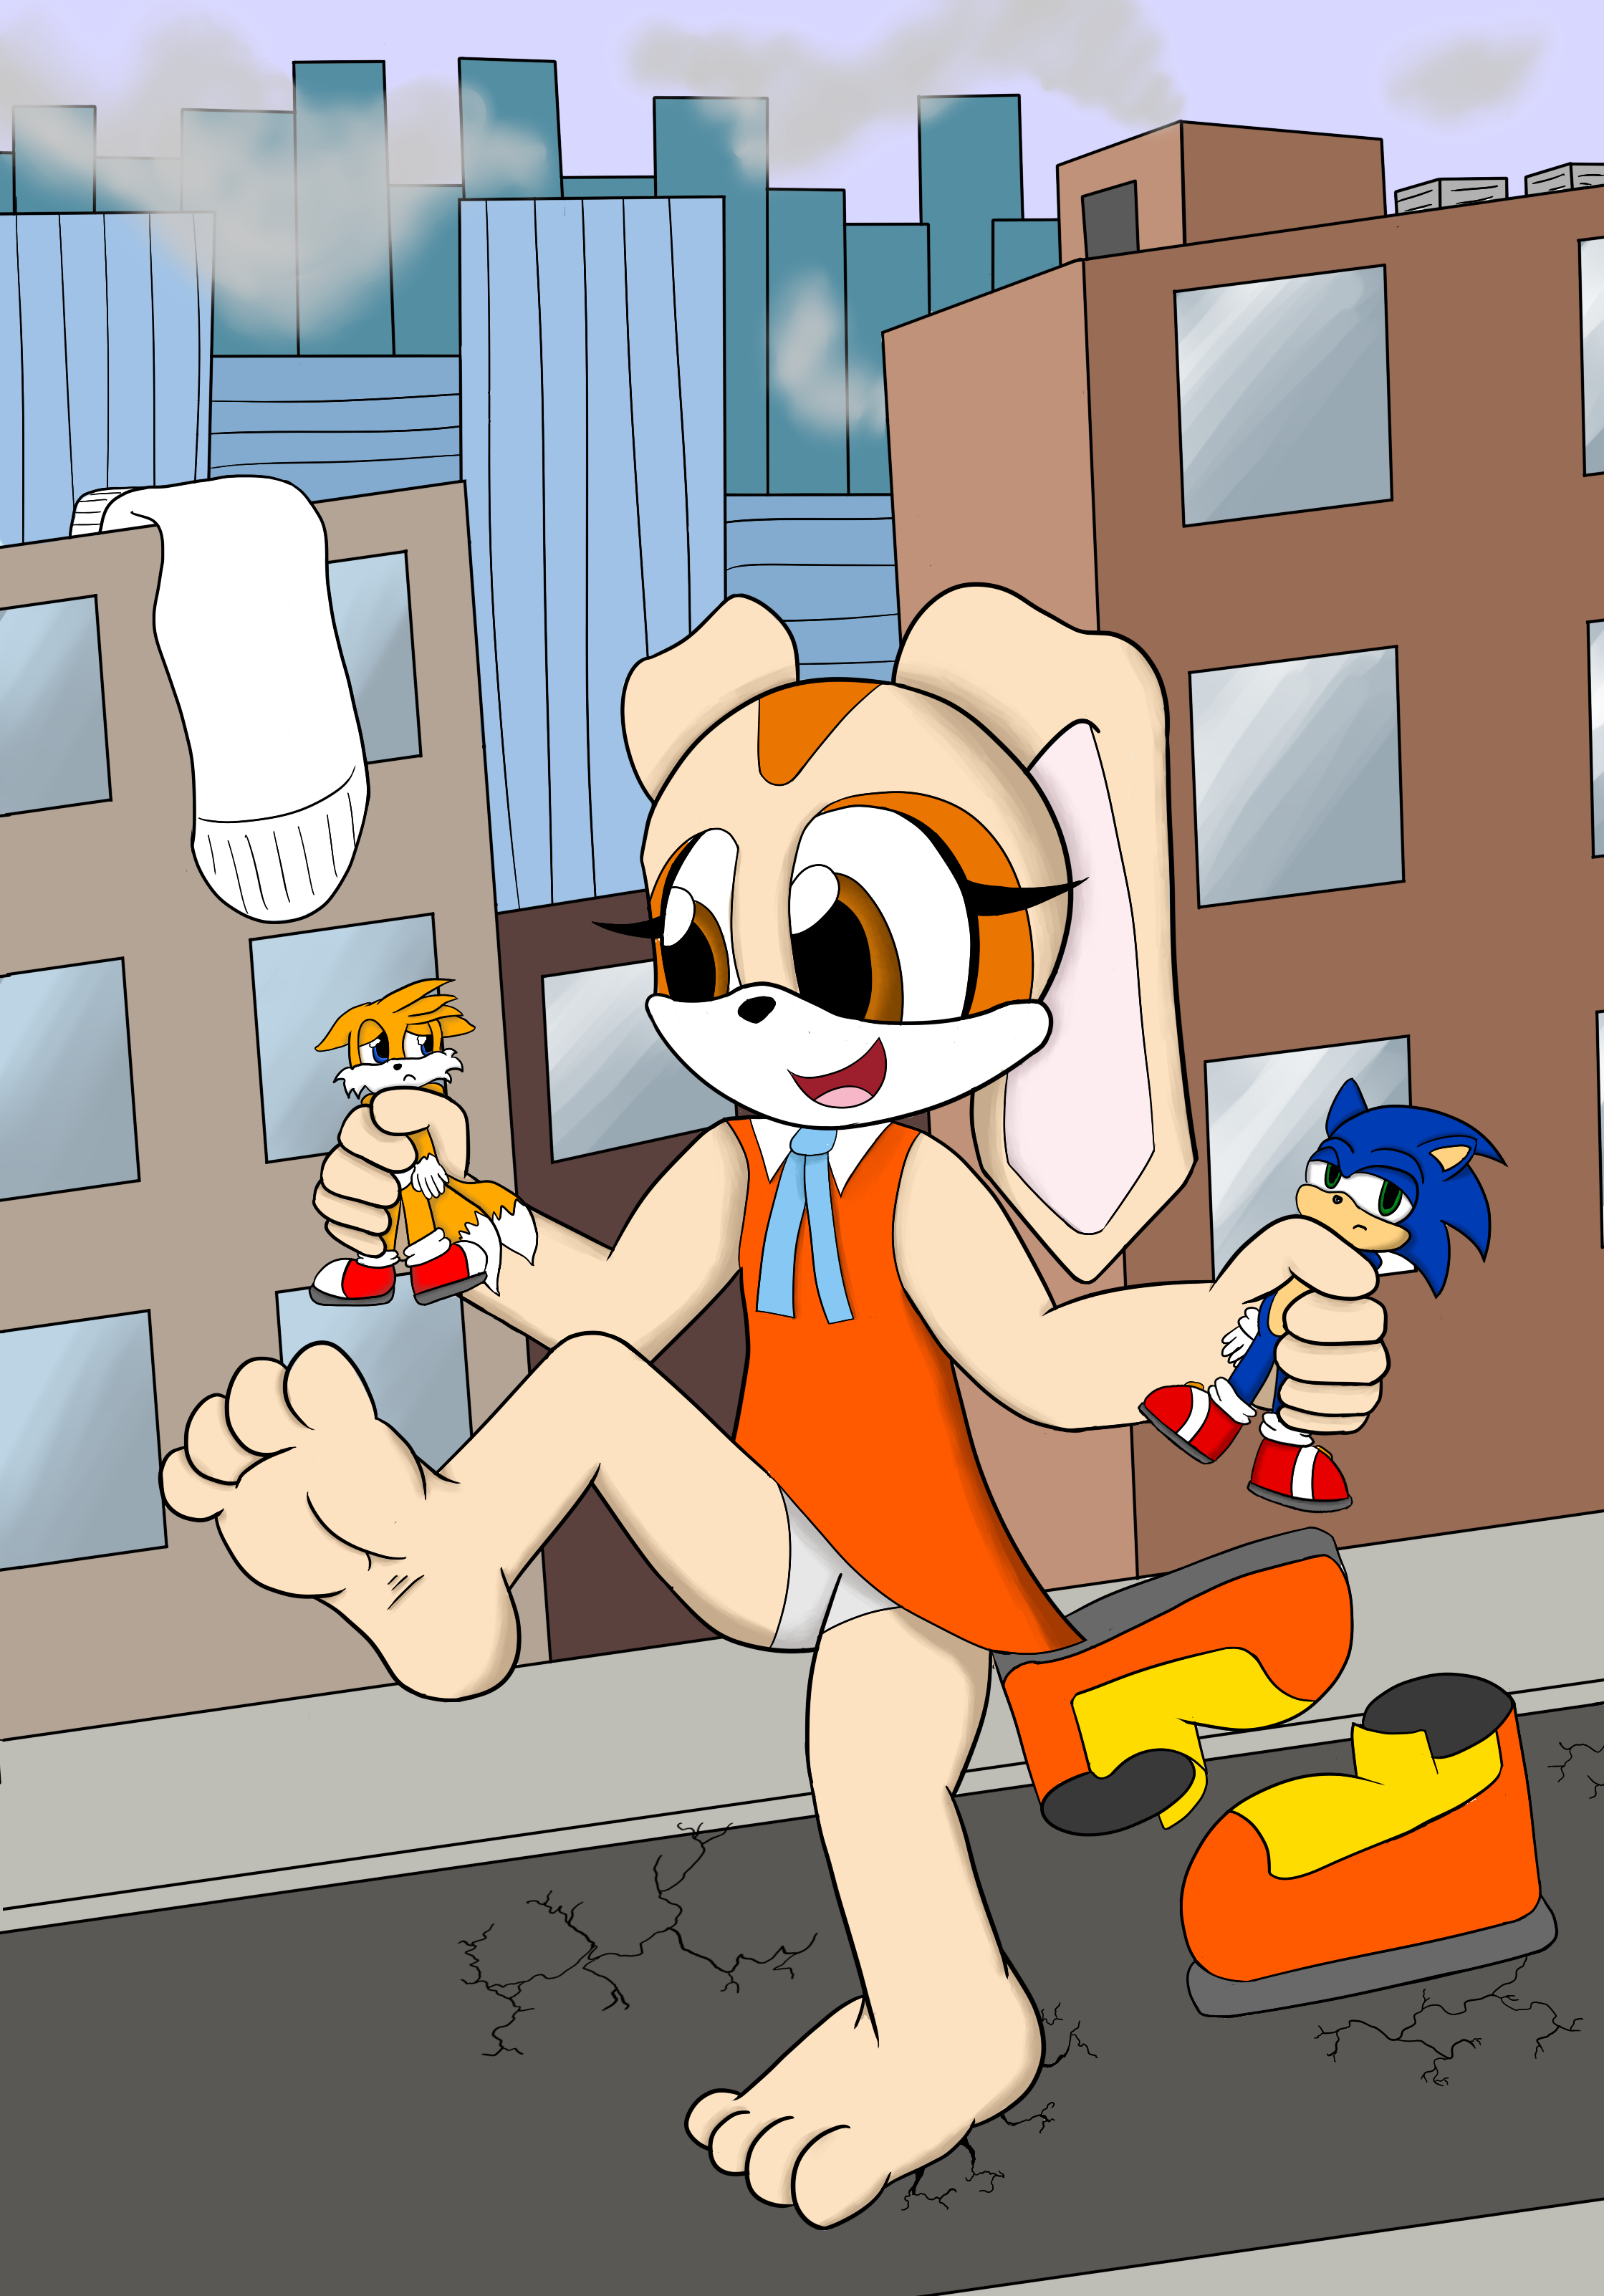 Creams New Toys by FoxKai Submission Inkbunny, the Furry Art